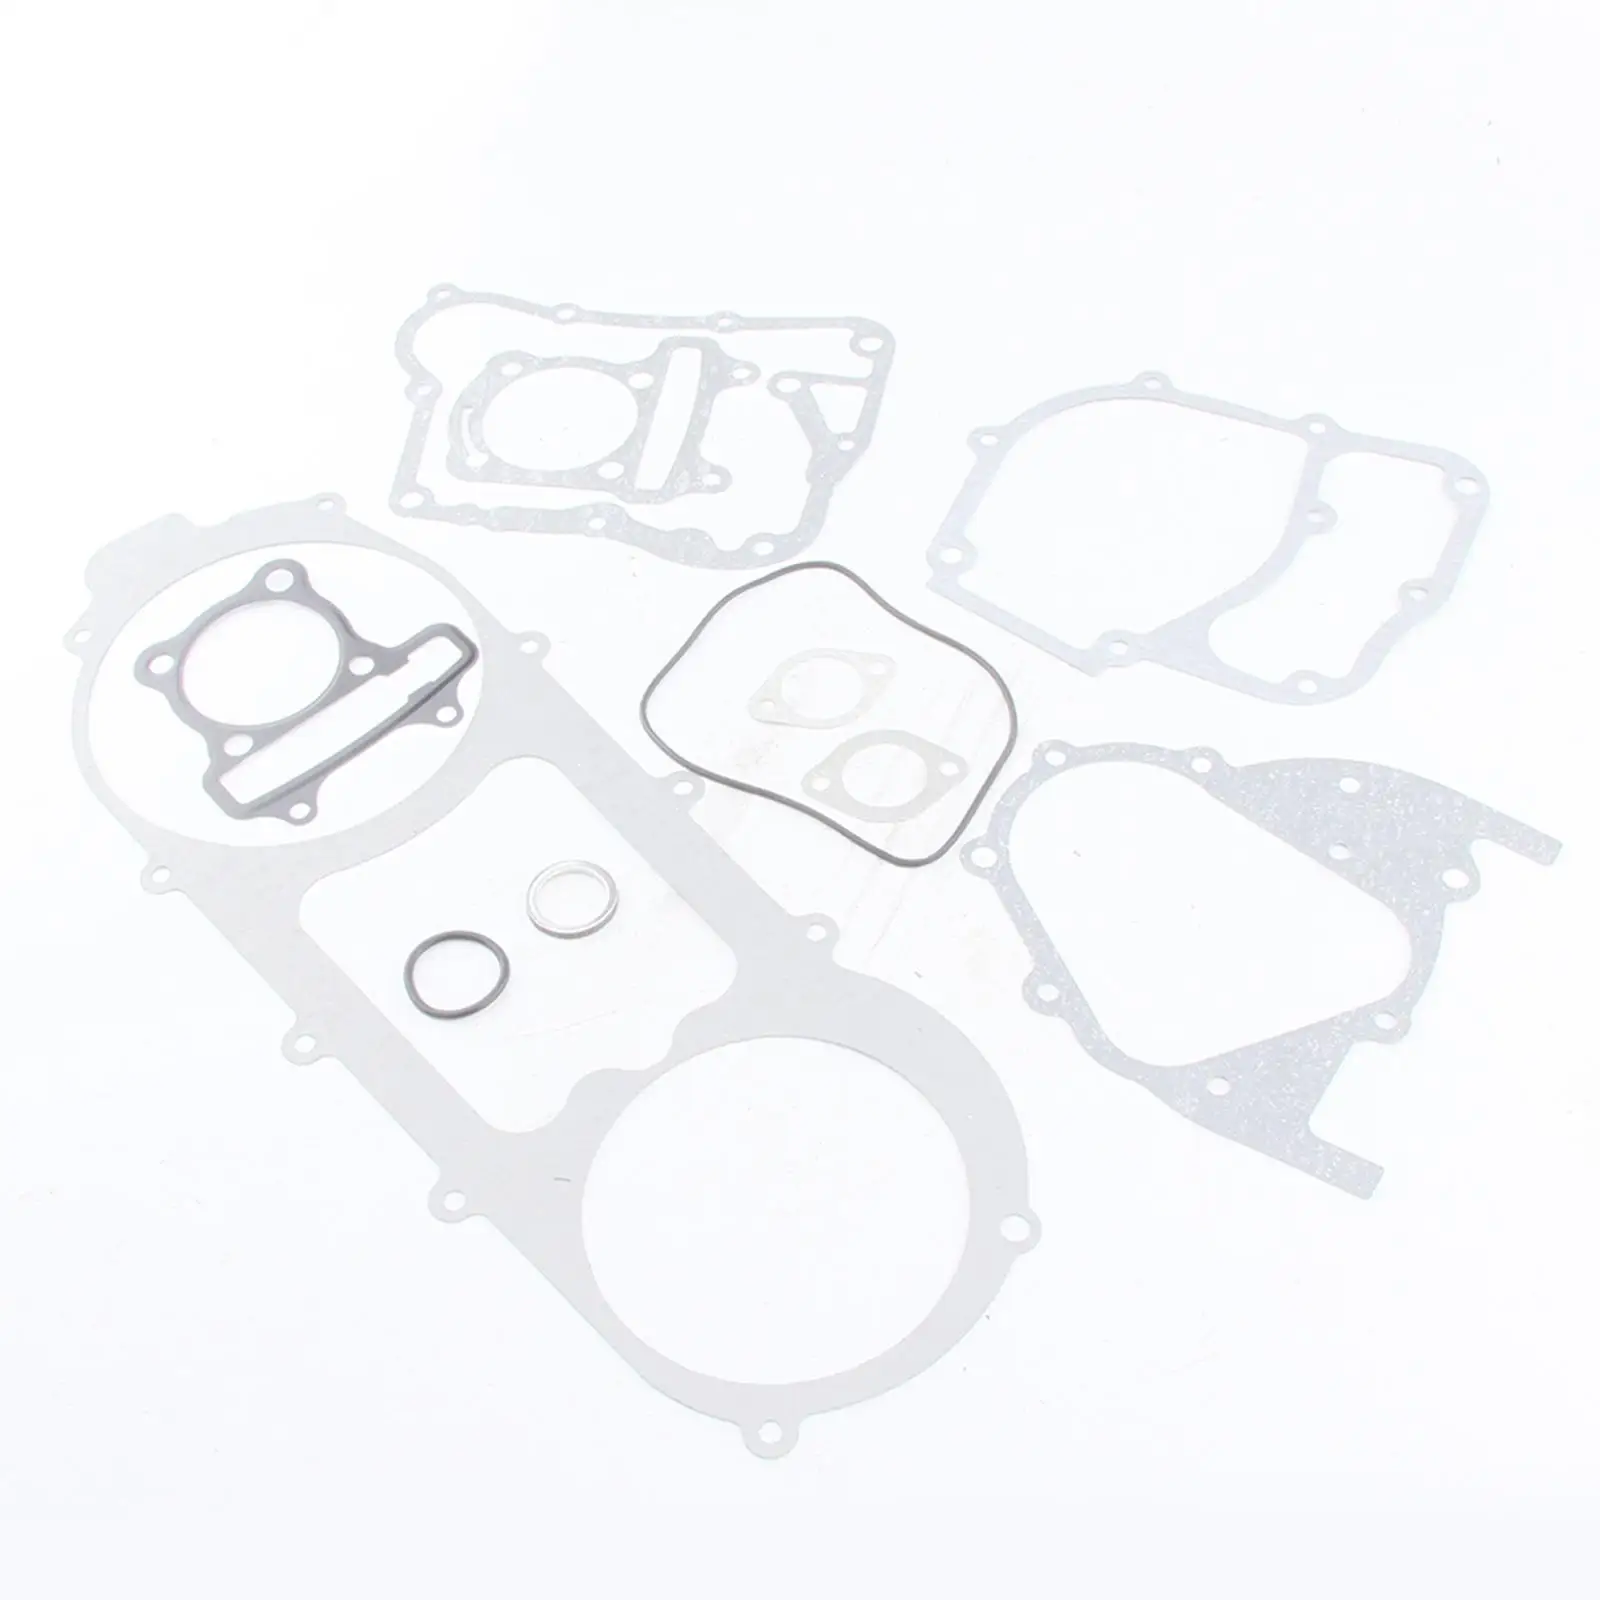 NEW Engine Head Gasket Set for GY6 150cc Moped Scooters  Go Karts Quad